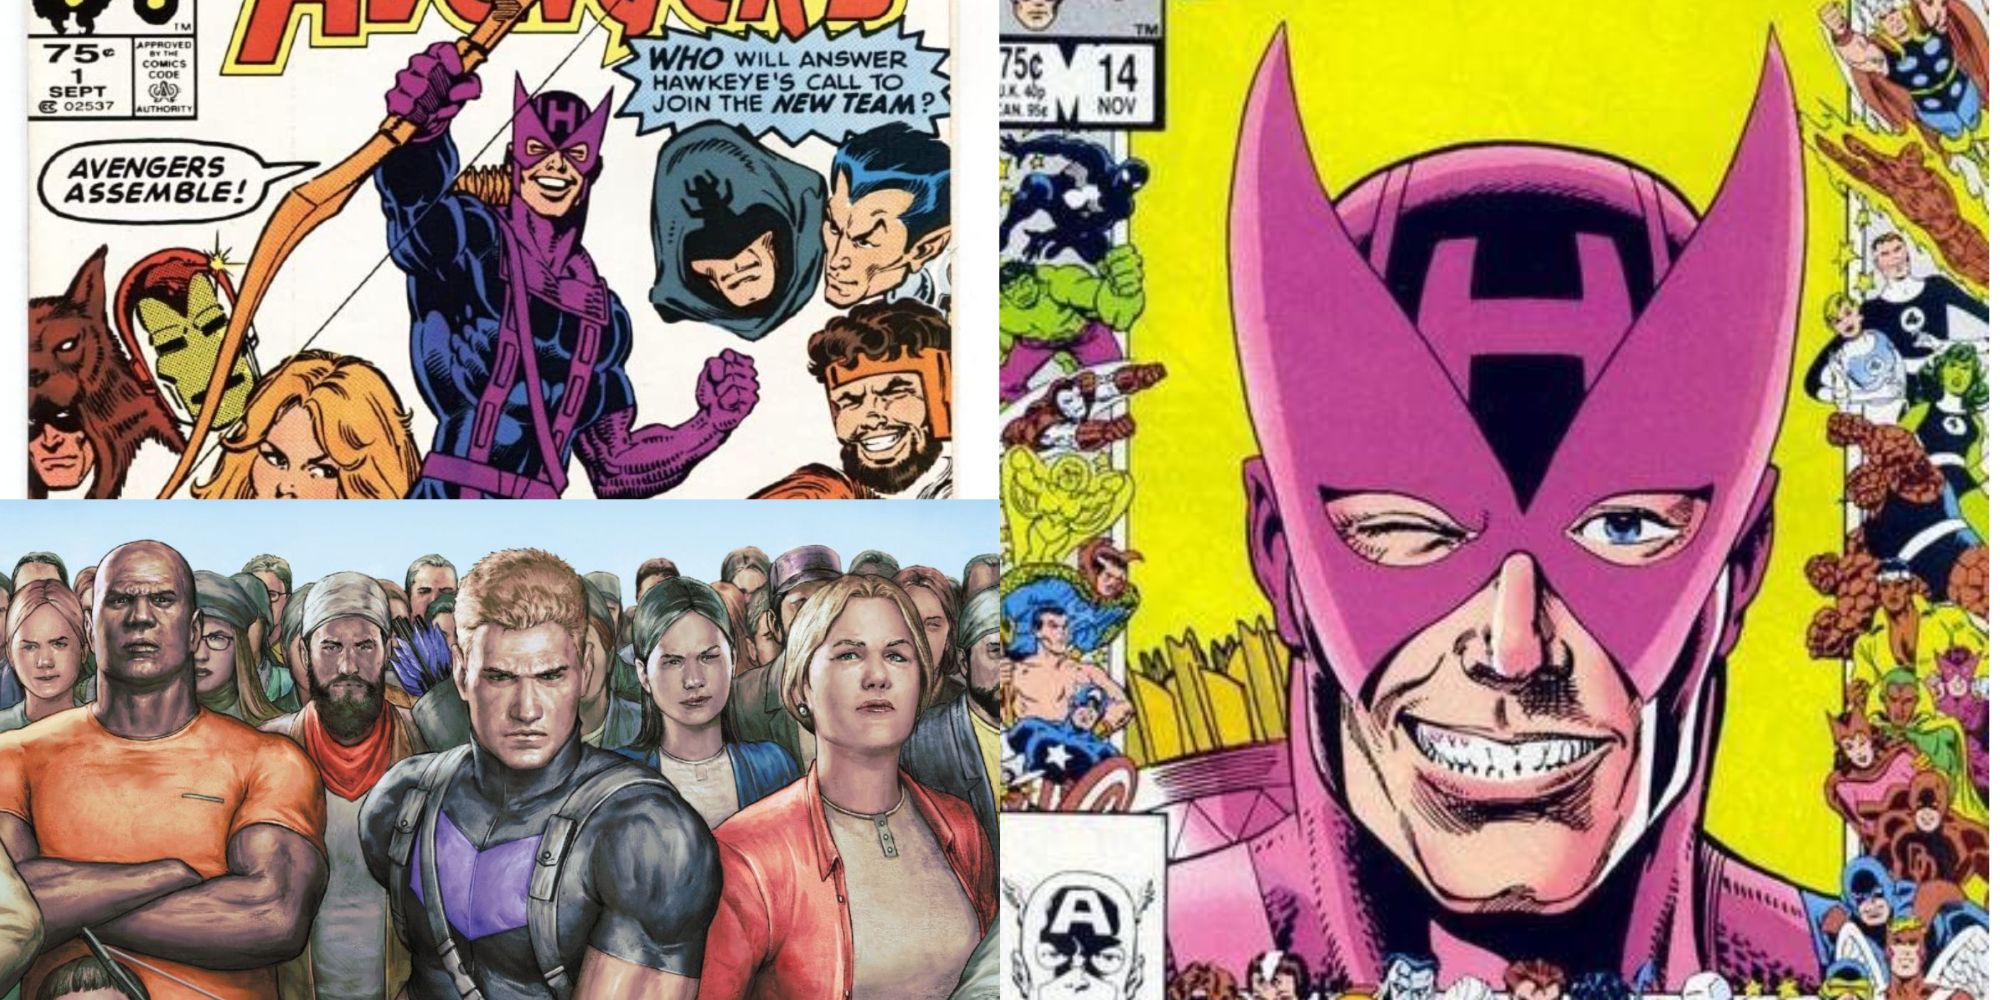 the cover to West Coast Avengers #14 featuring Hawkeye winking, Hawkeye on the cover of Occupy Avengers #1, and Hawkeye on the cover of West Coast Avengers #1